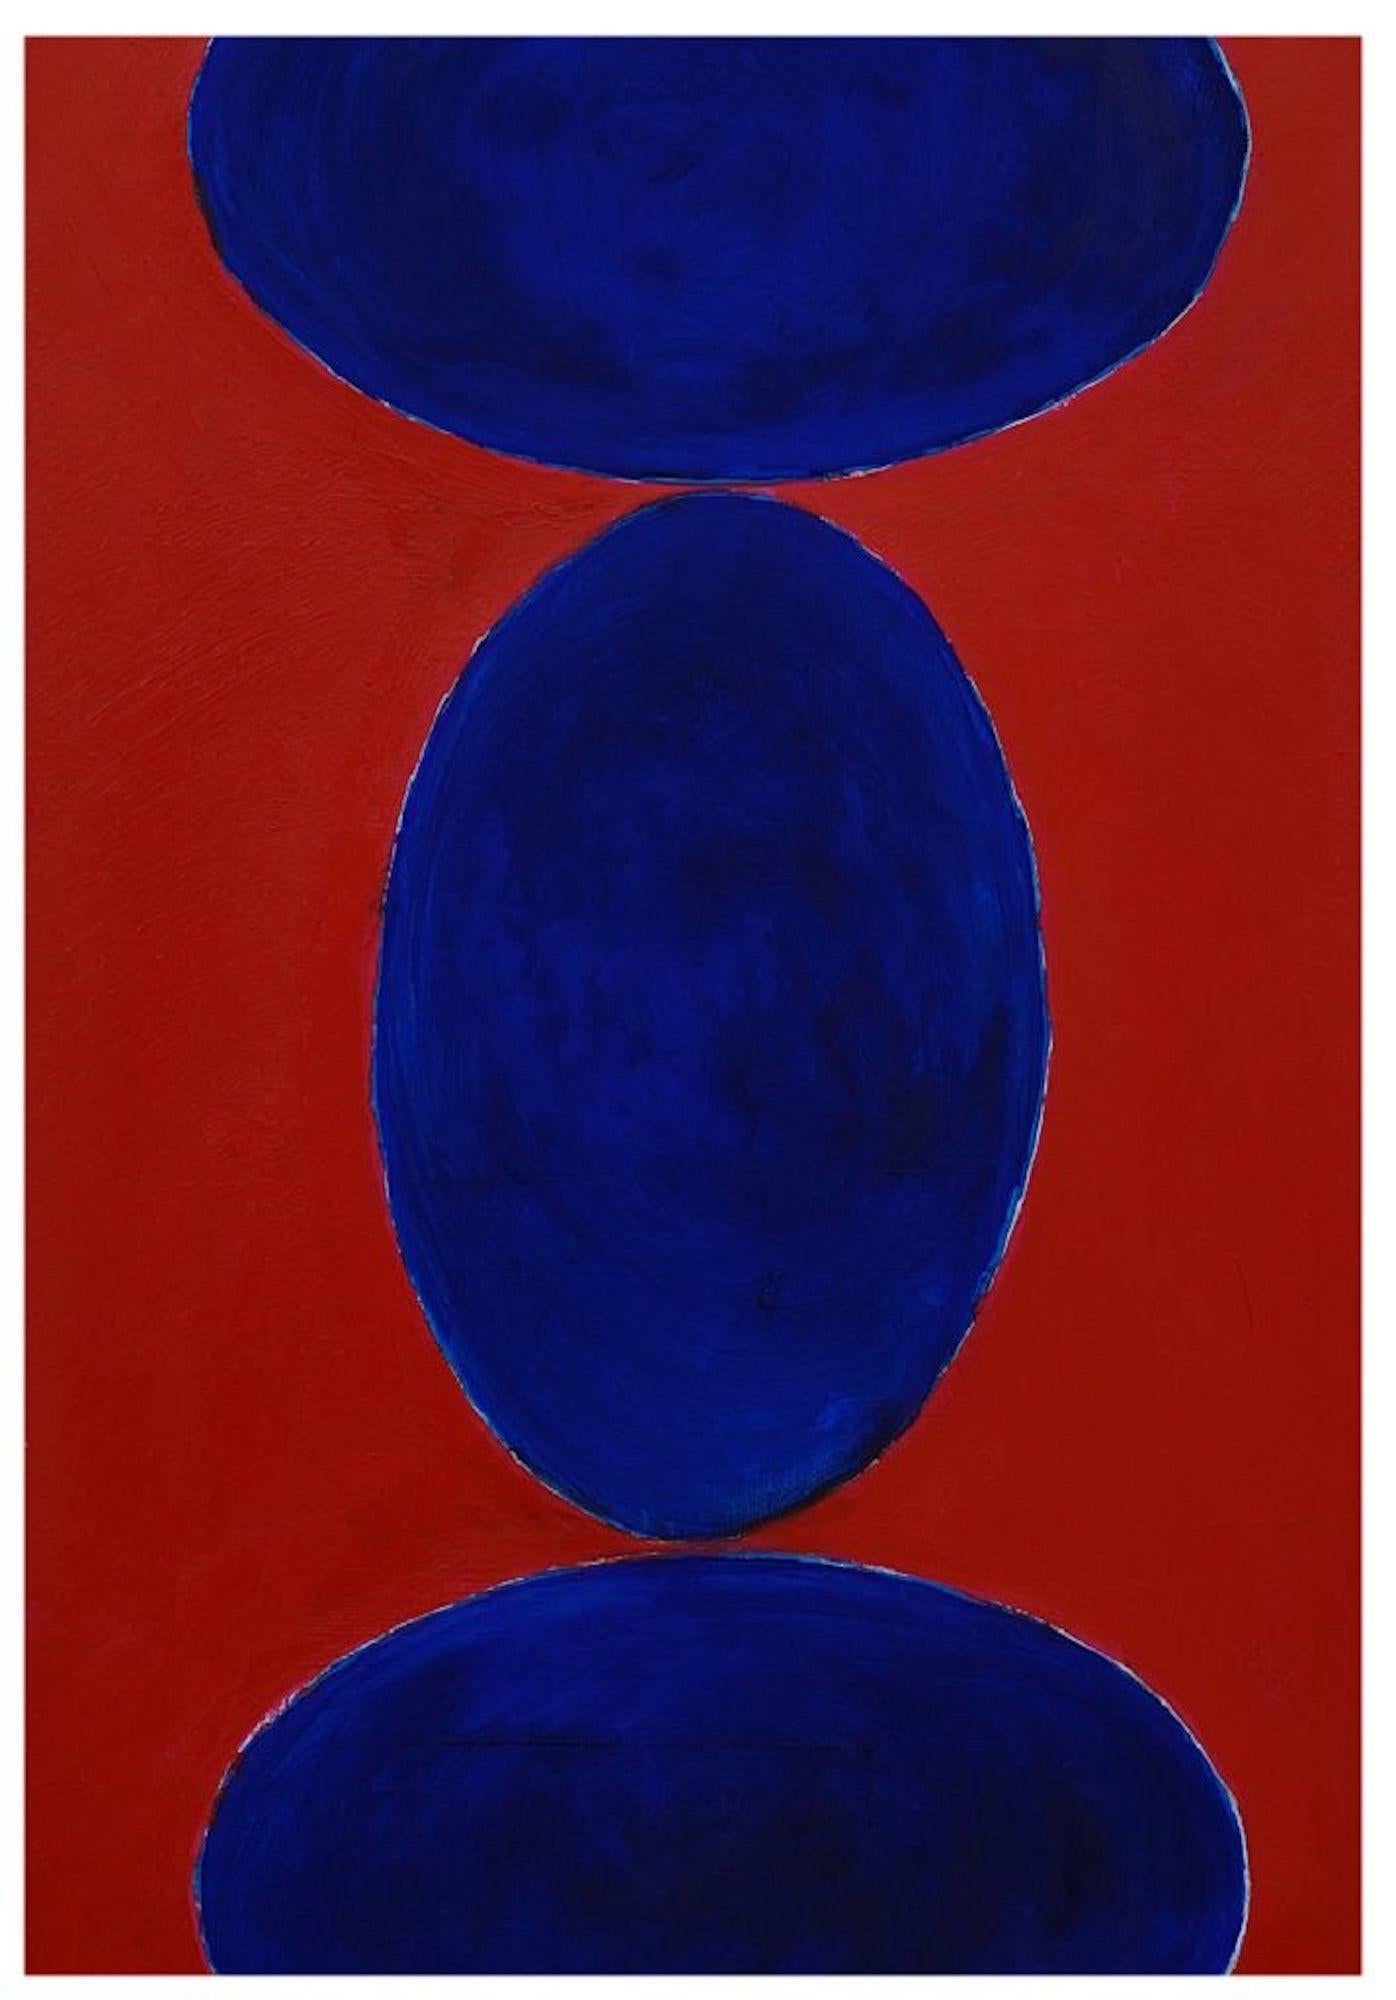 Abstract Expressionism is an original artwork realized by Giorgio Lo Fermo in 2015. Oil on canvas. Perfect conditions.

It represents a geometrical abstract composition. There are three elliptical shapes on a bright red background. The contrast